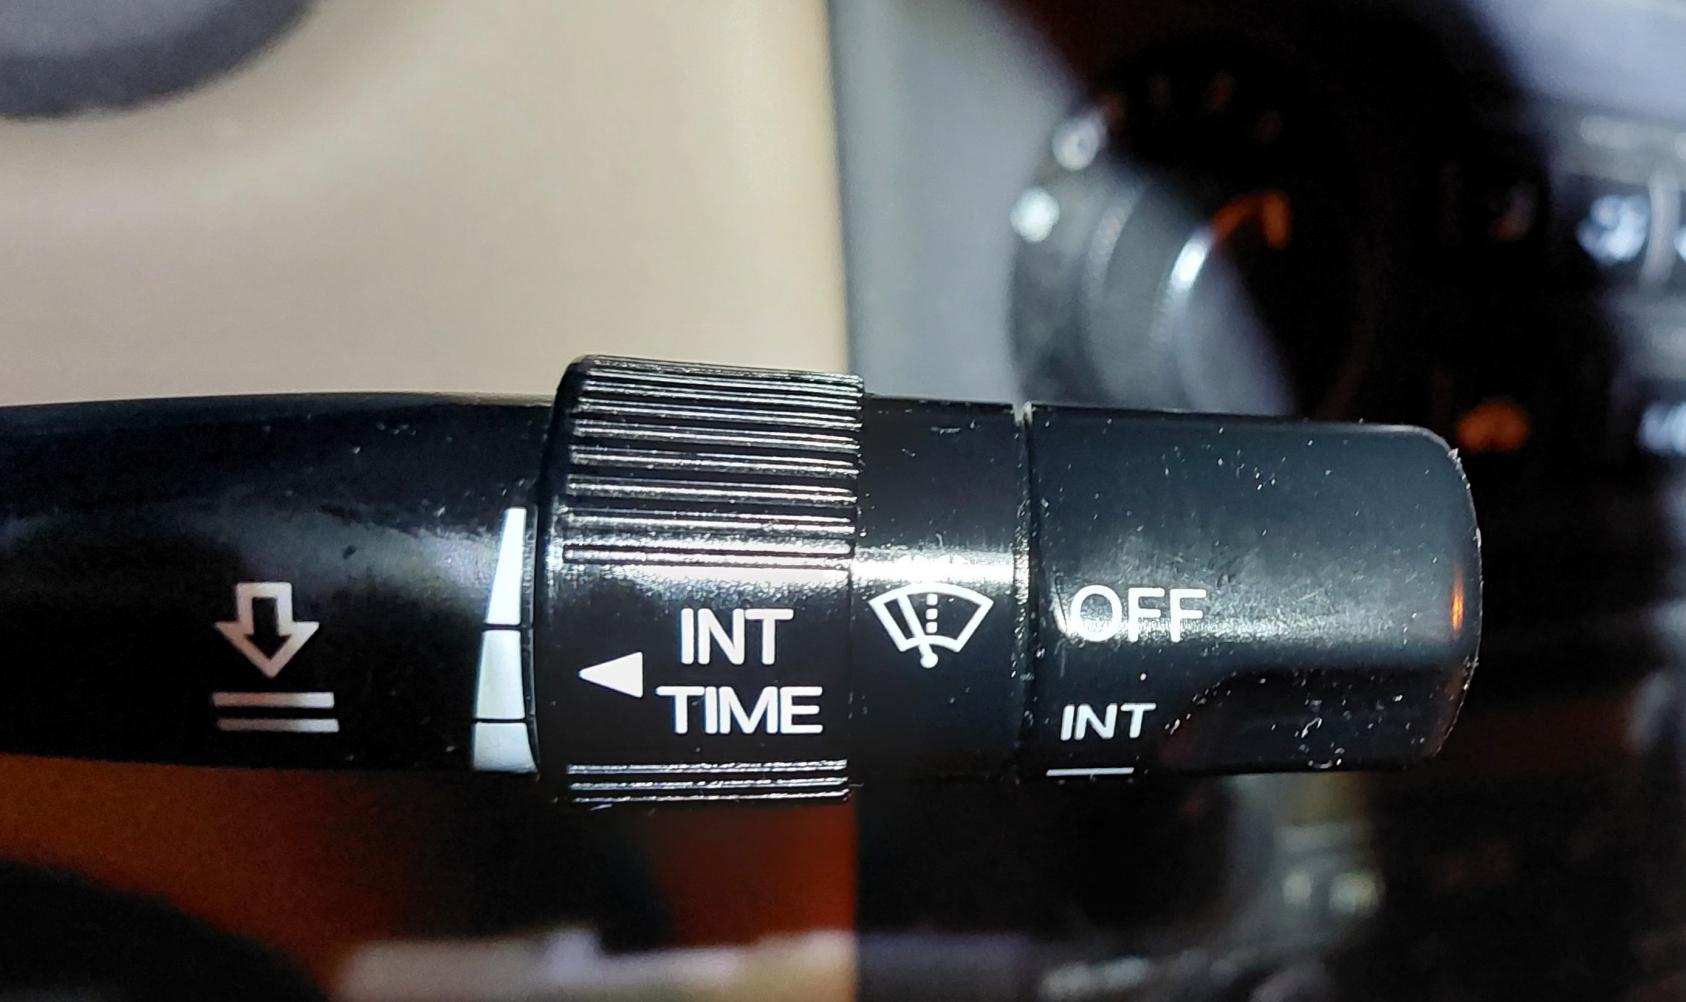 wiper on off switch very tight - how to loosen?-t2-jpg